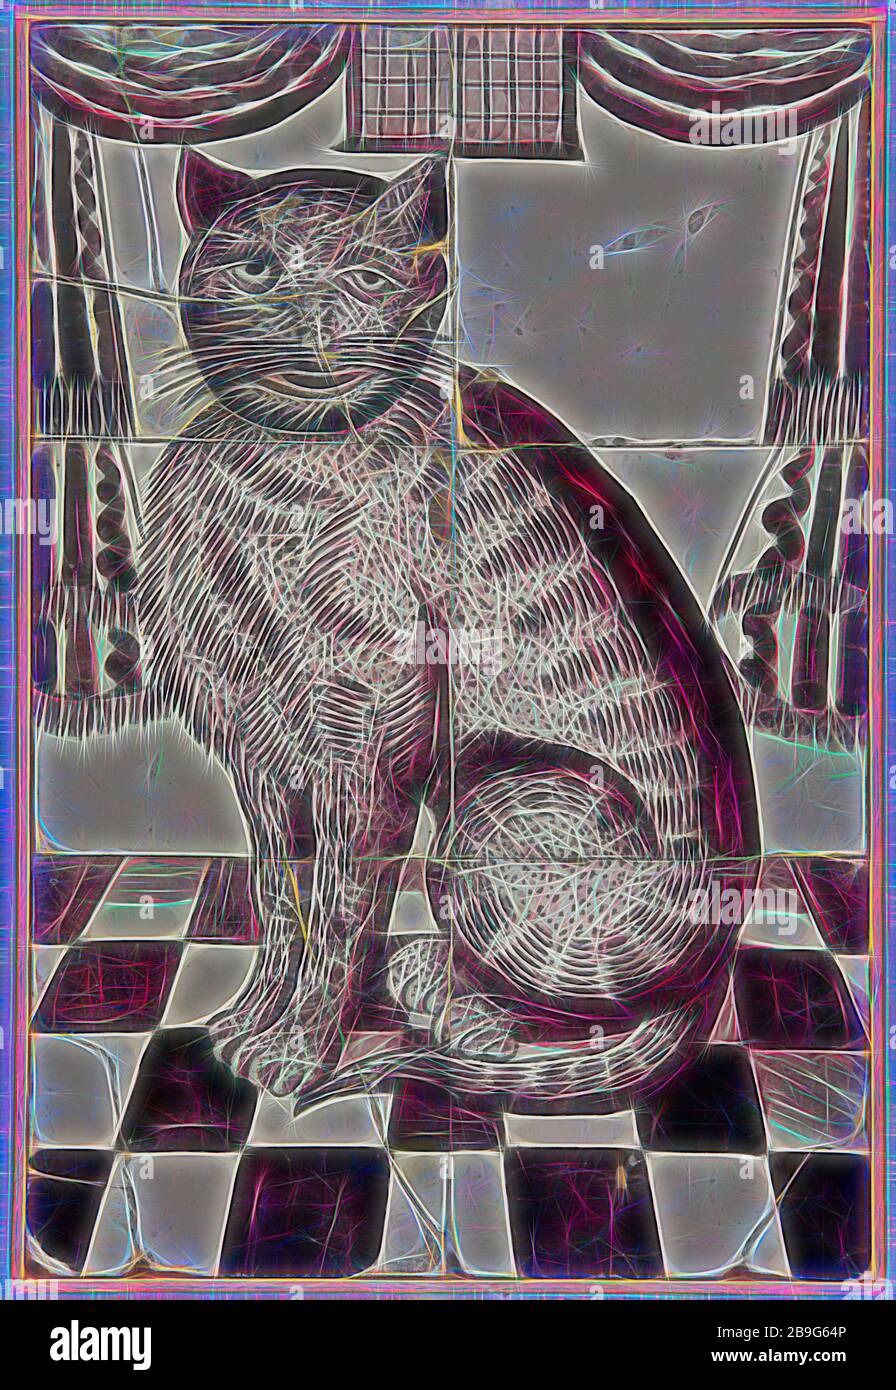 Van der Wolk?, Purple tile tableau, sitting cat facing left, on black and  white checkered floor, looks at the viewer, tile picture material ceramic  earthenware glaze metal, Two wide three high on